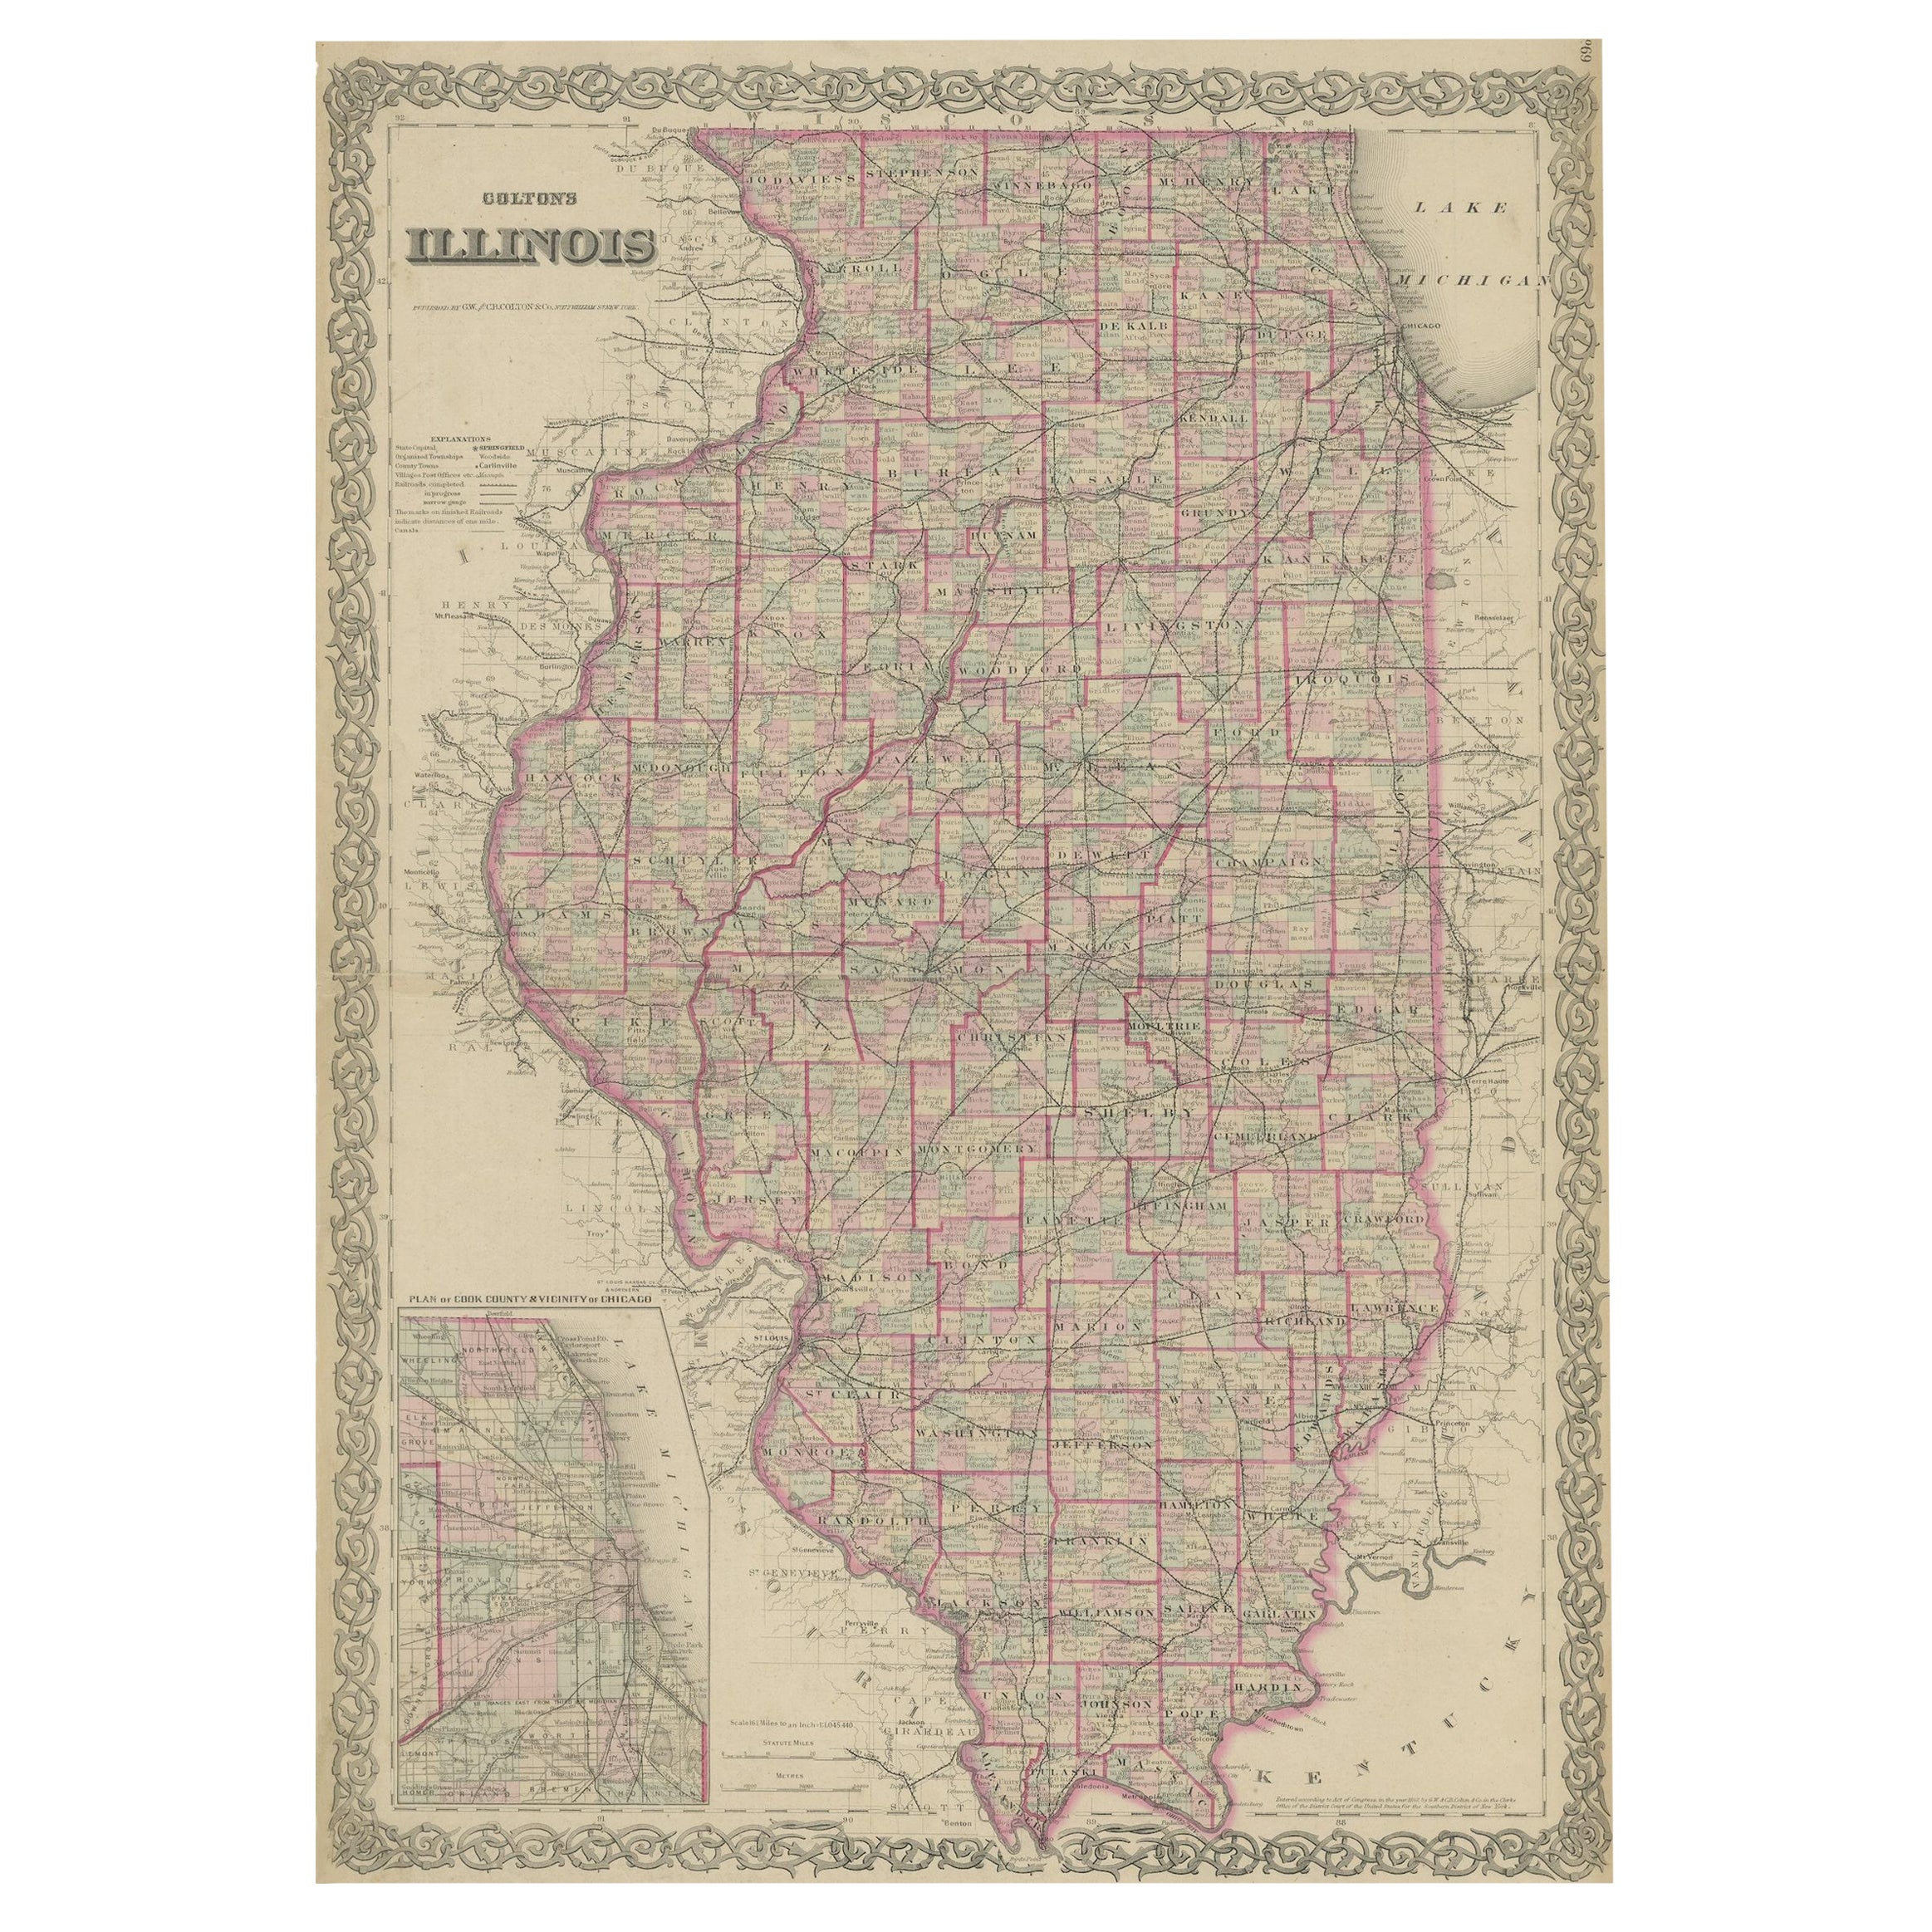 Colton's Map of Illinois, with an Inset of Chicago